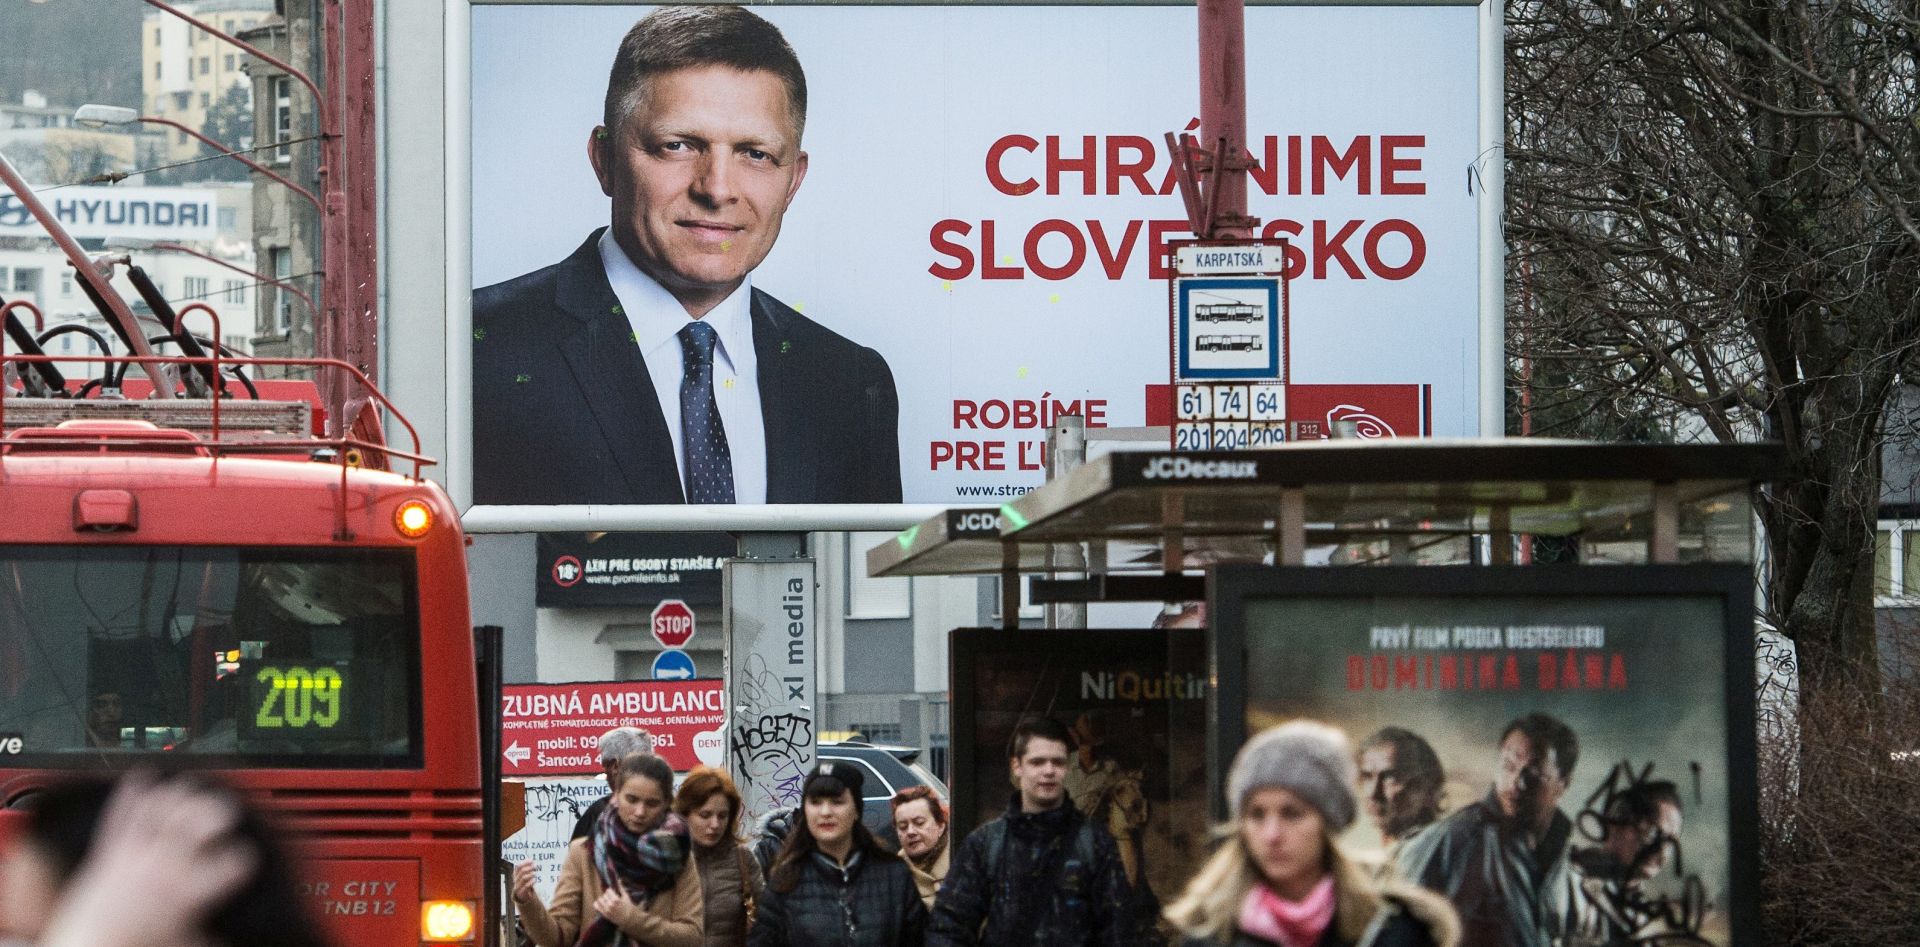 epa05194739 Election poster of 'Direction - Social Democracy' party SMER with Slovakian Prime Minister and SMER leader Robert Fico reading 'We defend Slovakia' pictured in Bratislava, Slovakia, 04 March 2016. Parliamentary elections in Slovakia will be held on 05 March 2016.  EPA/FILIP SINGER